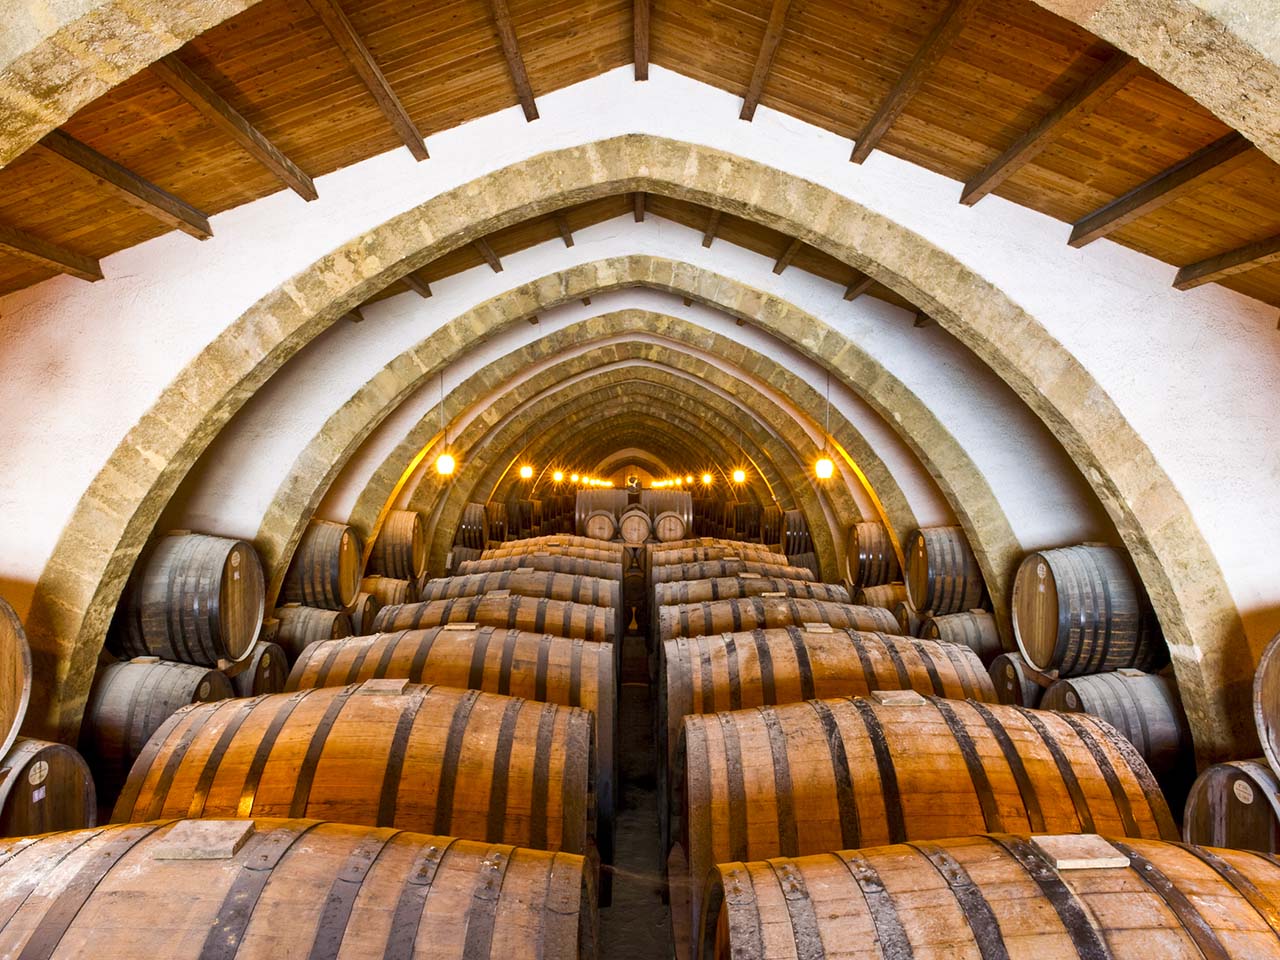 barrels in a cellar with acute vaults